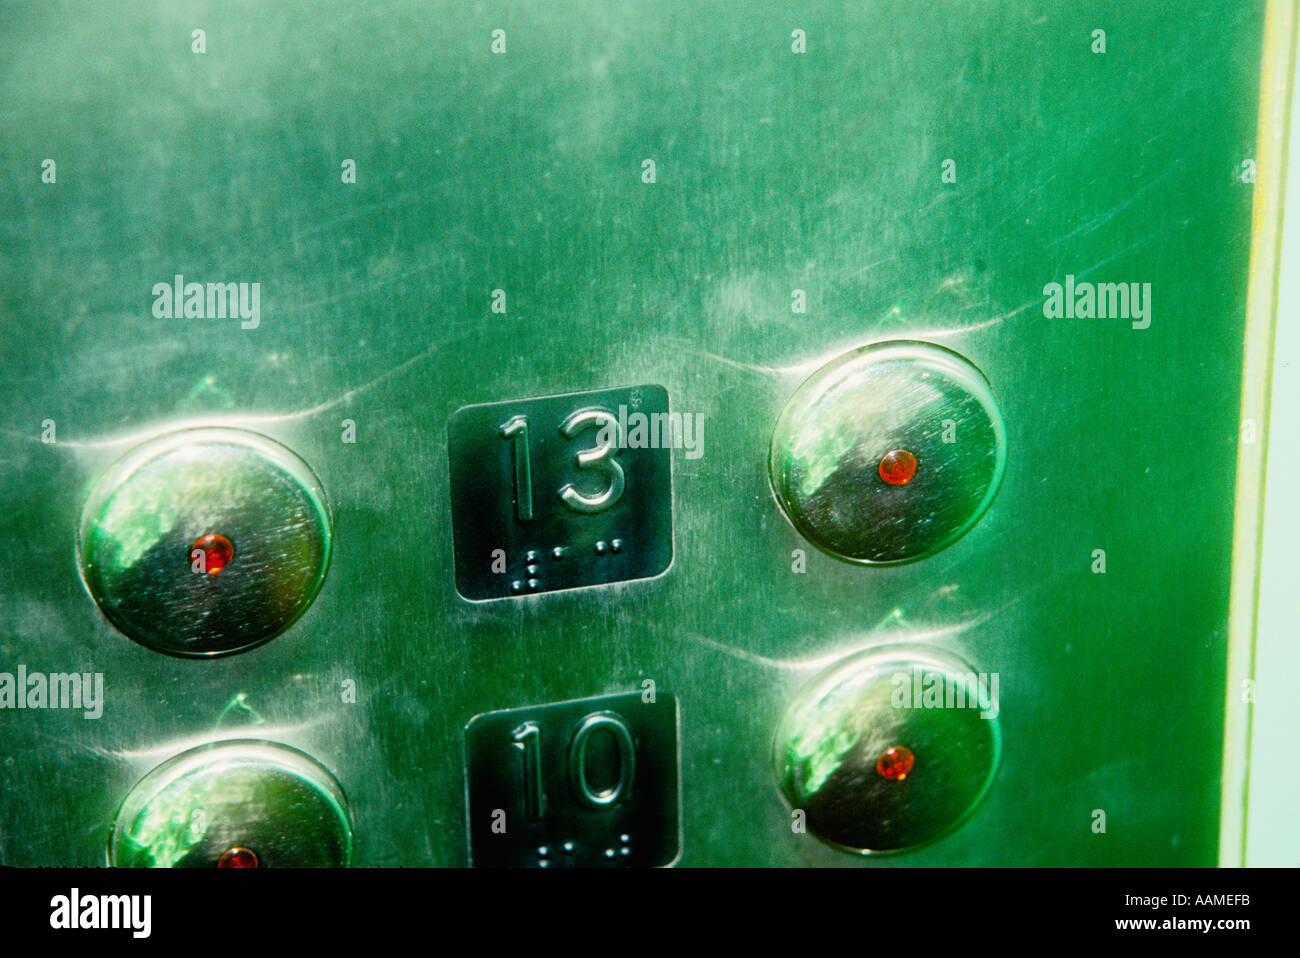 The 13th Floor On An Elevator Button Stock Photo 2346746 Alamy